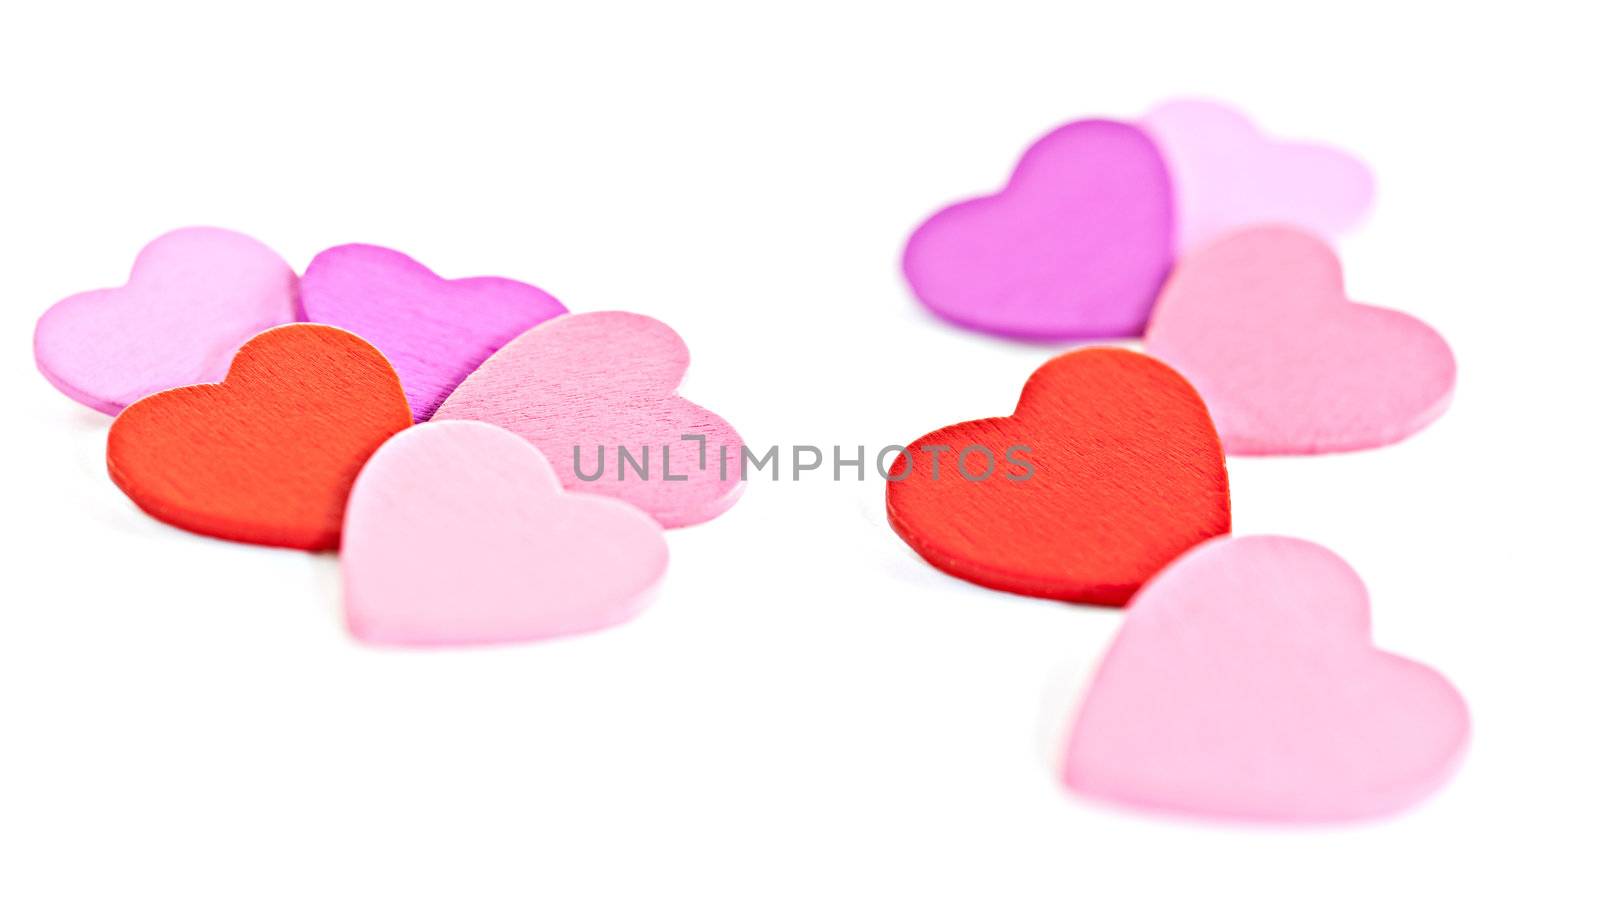 Colorful wooden pegs with a heart on a white background. Macro photography.
